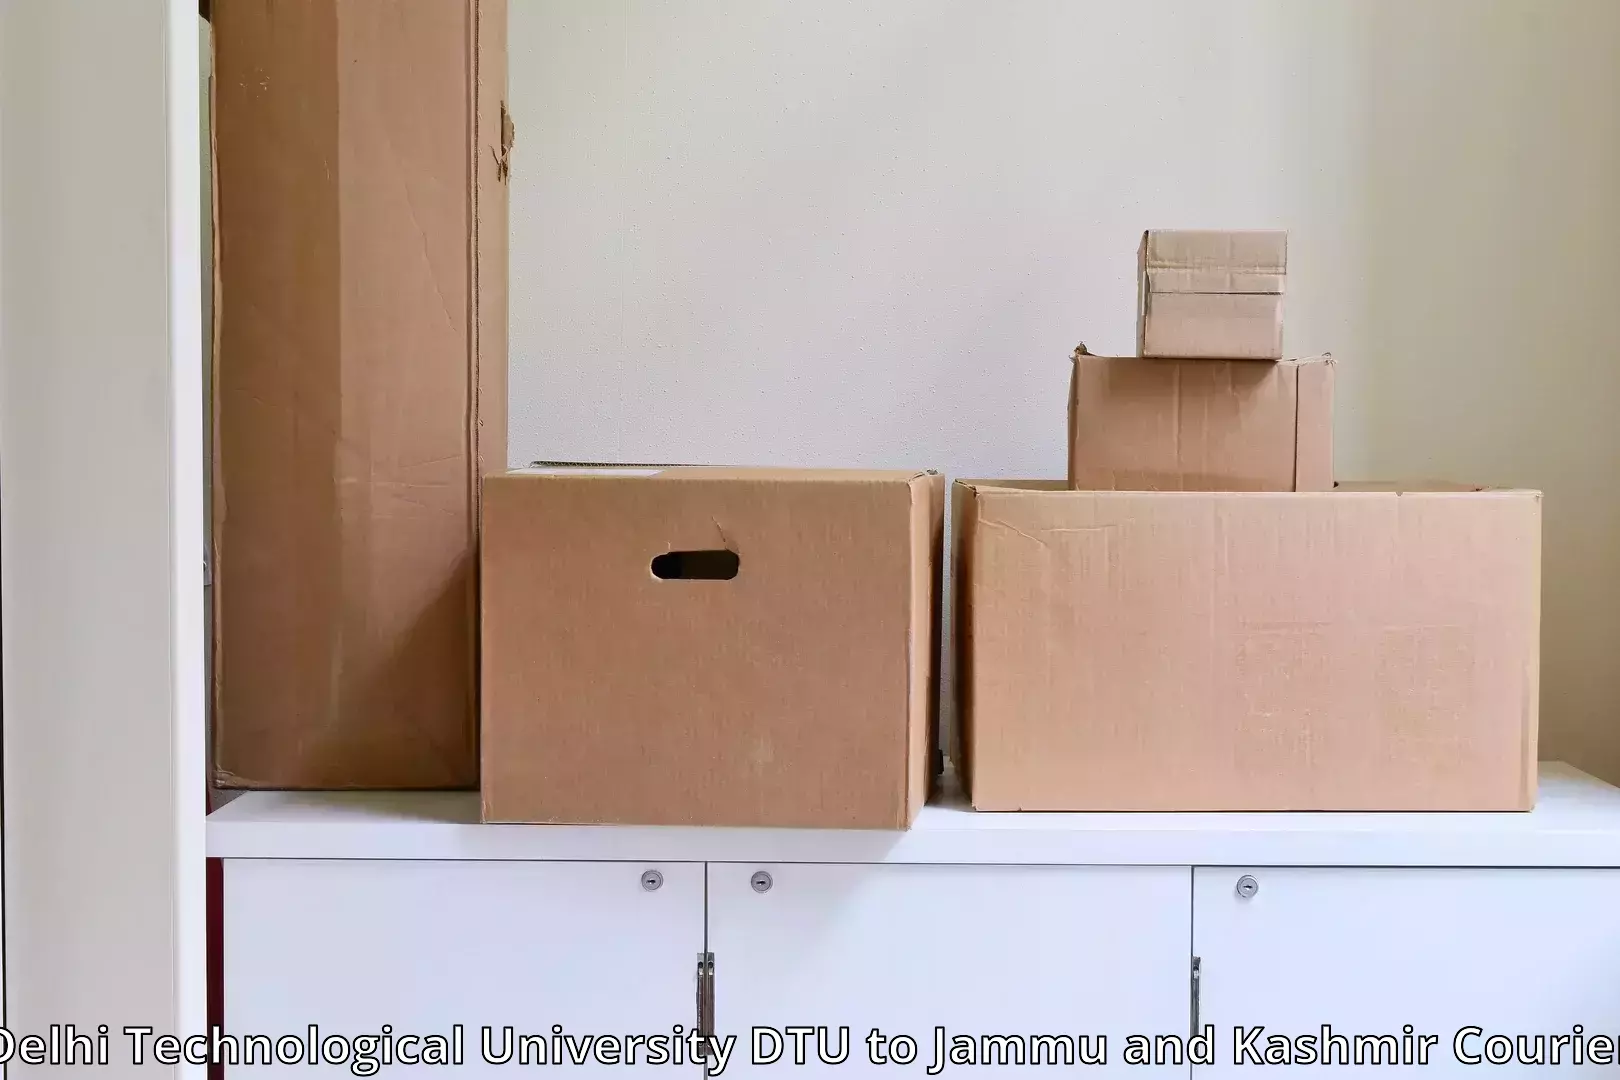 Moving and packing experts Delhi Technological University DTU to Udhampur